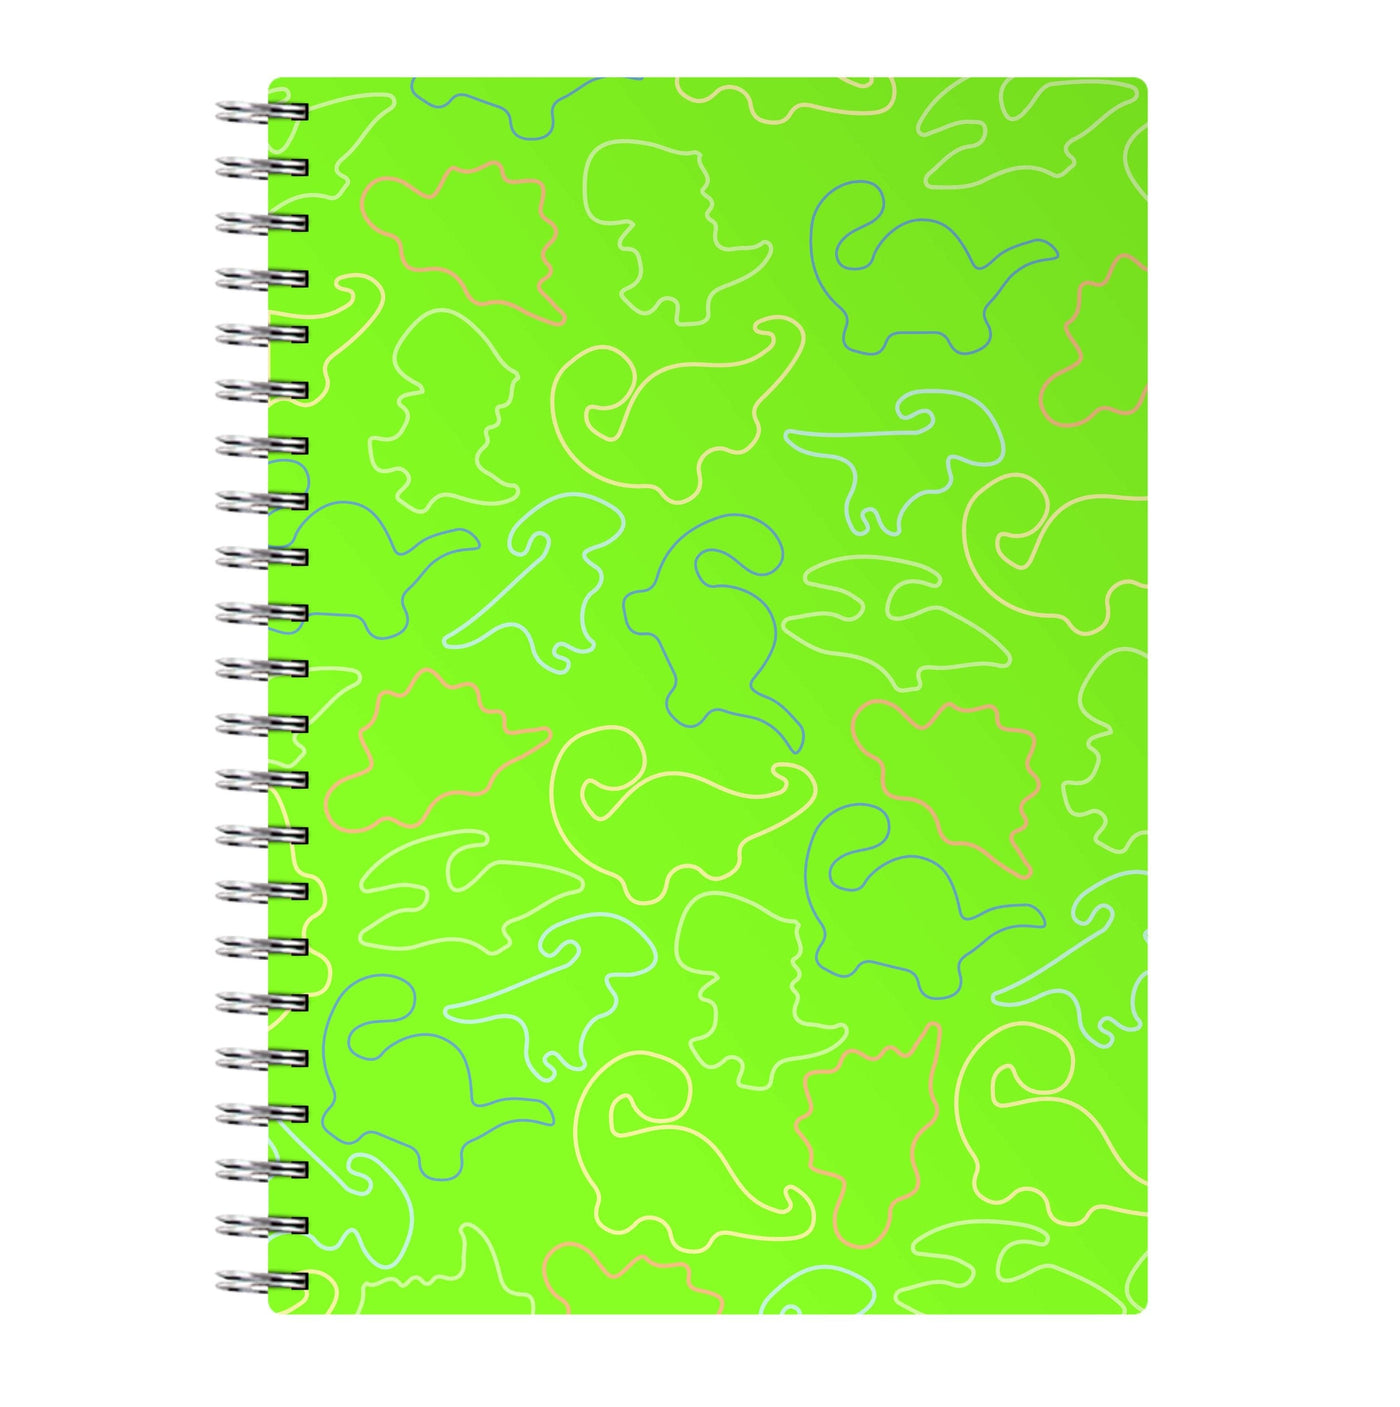 Outline Pattern - Dinosaurs Notebook